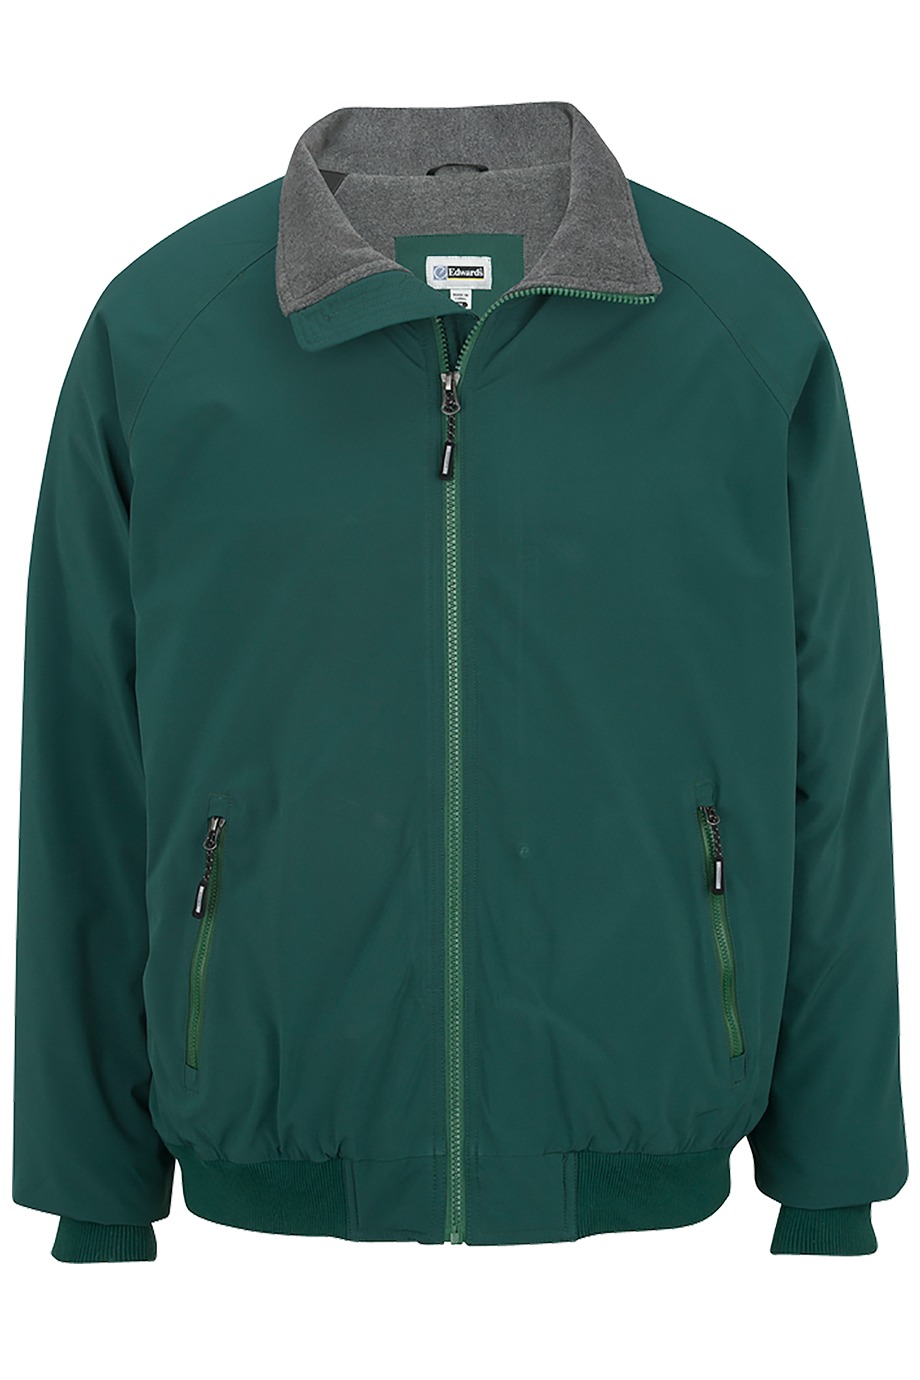 click to view FOREST GREEN w/CHARCOAL HEATHER FLEECE